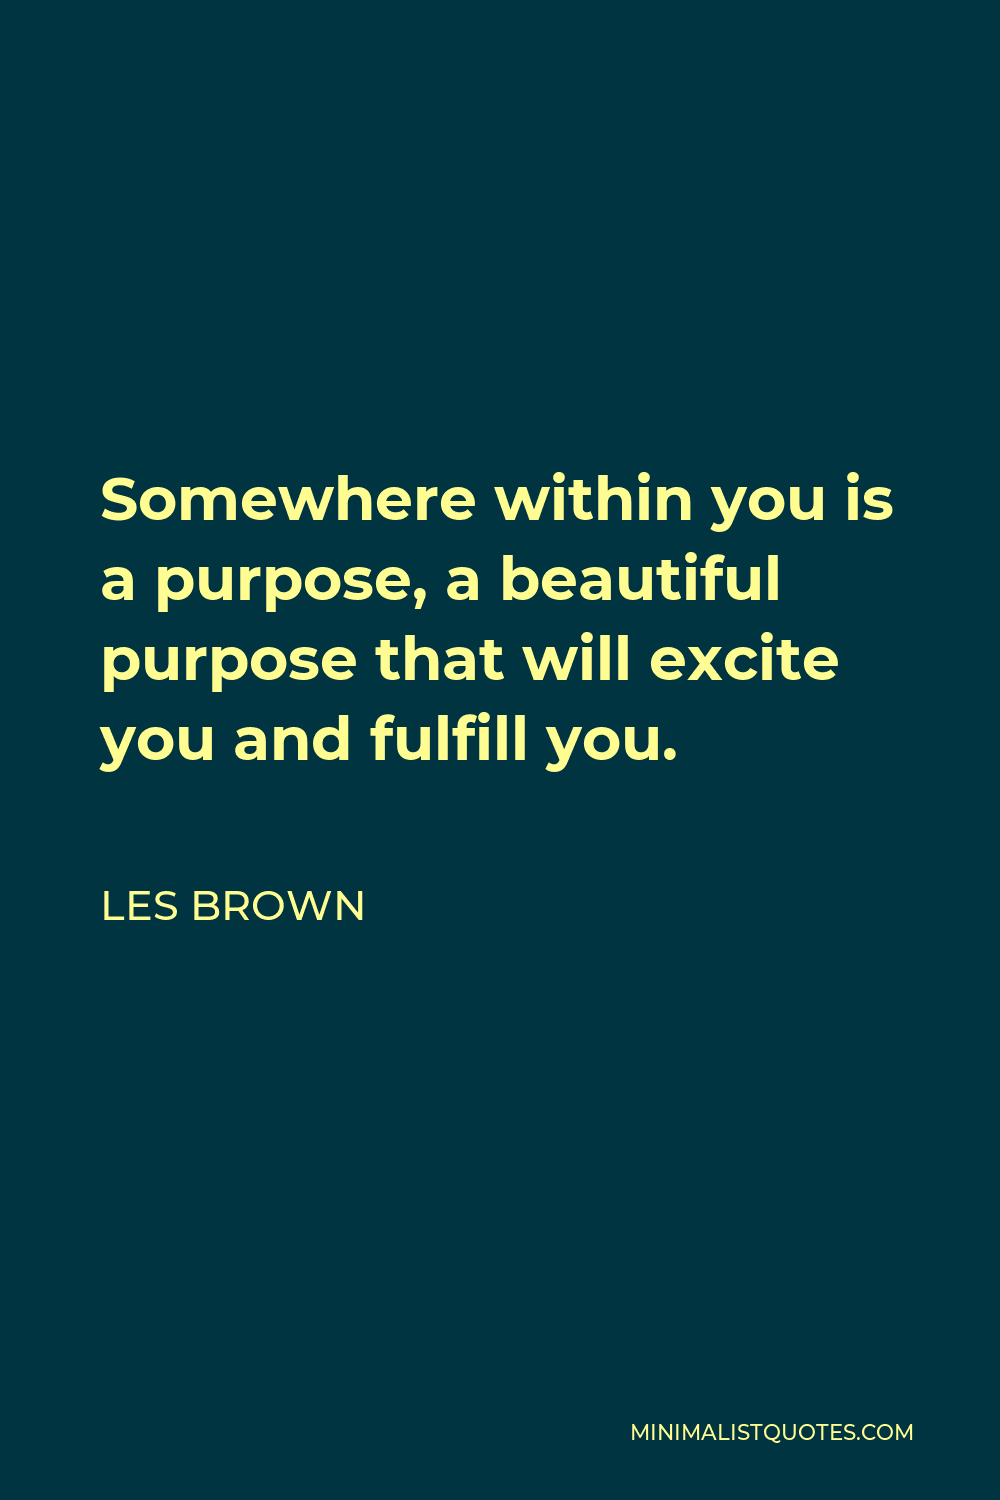 Les Brown Quote - Somewhere within you is a purpose, a beautiful purpose that will excite you and fulfill you.